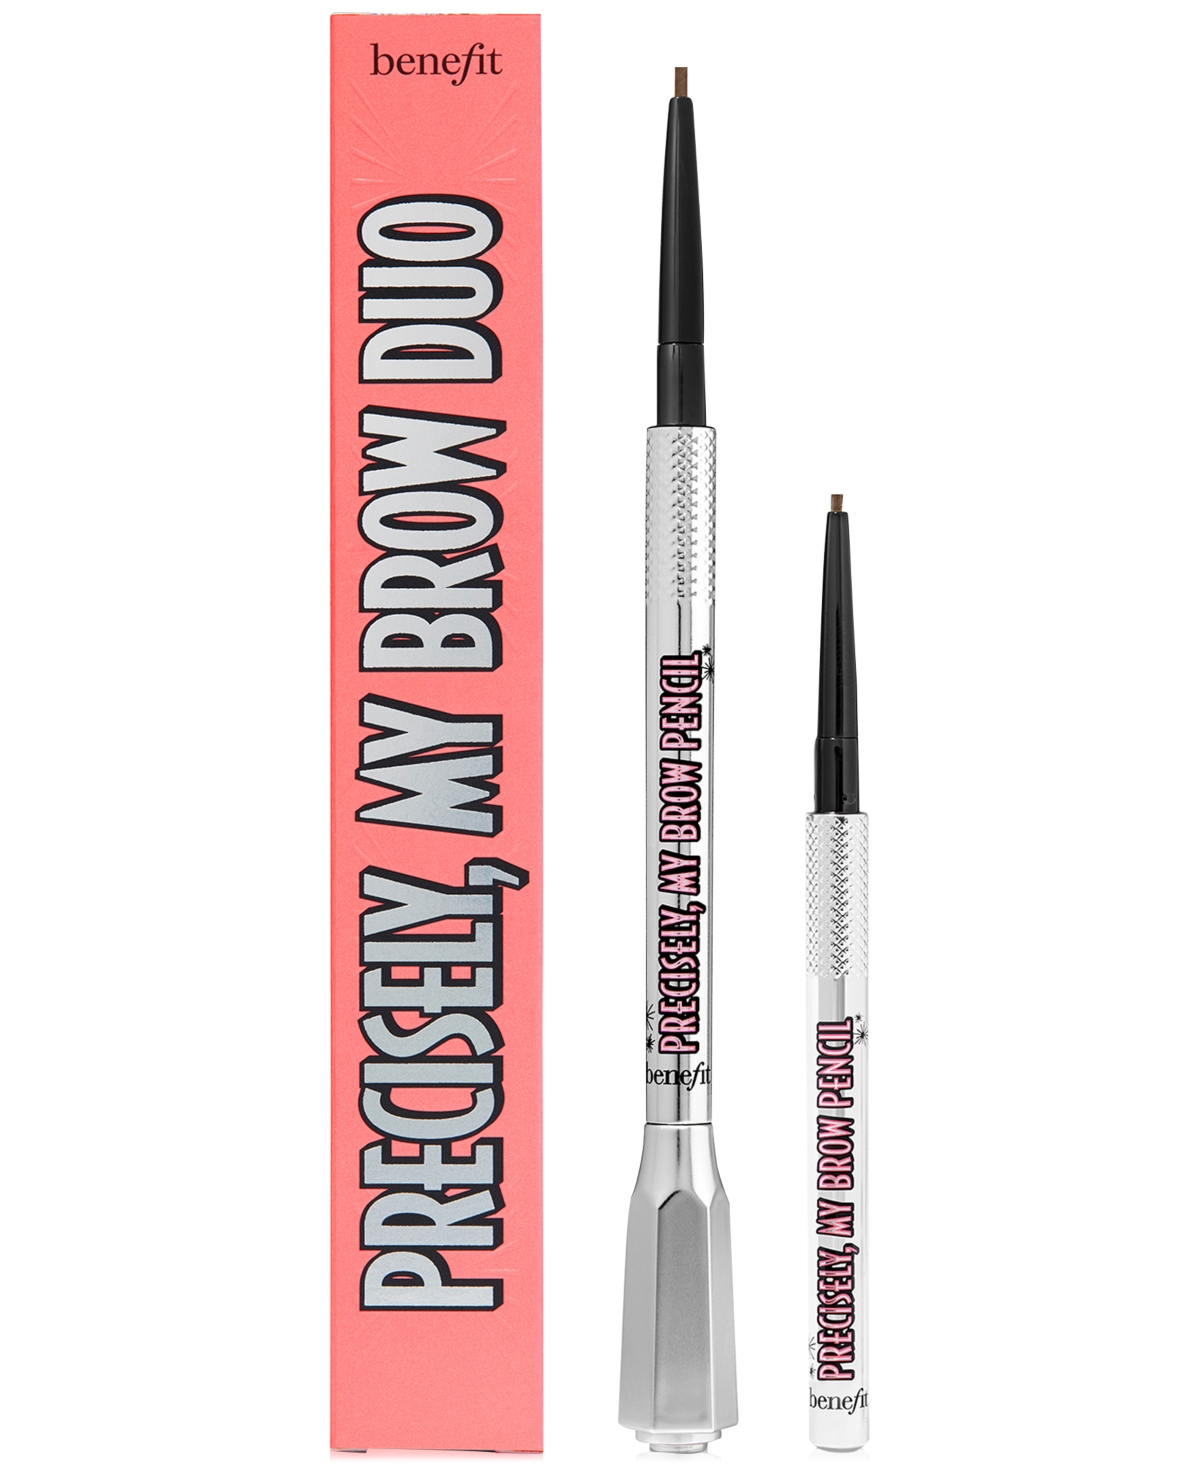 Benefit Cosmetics 2-pc. Precisely, My Brow Defining Eyebrow Pencil Set In Neutral Medium Brown